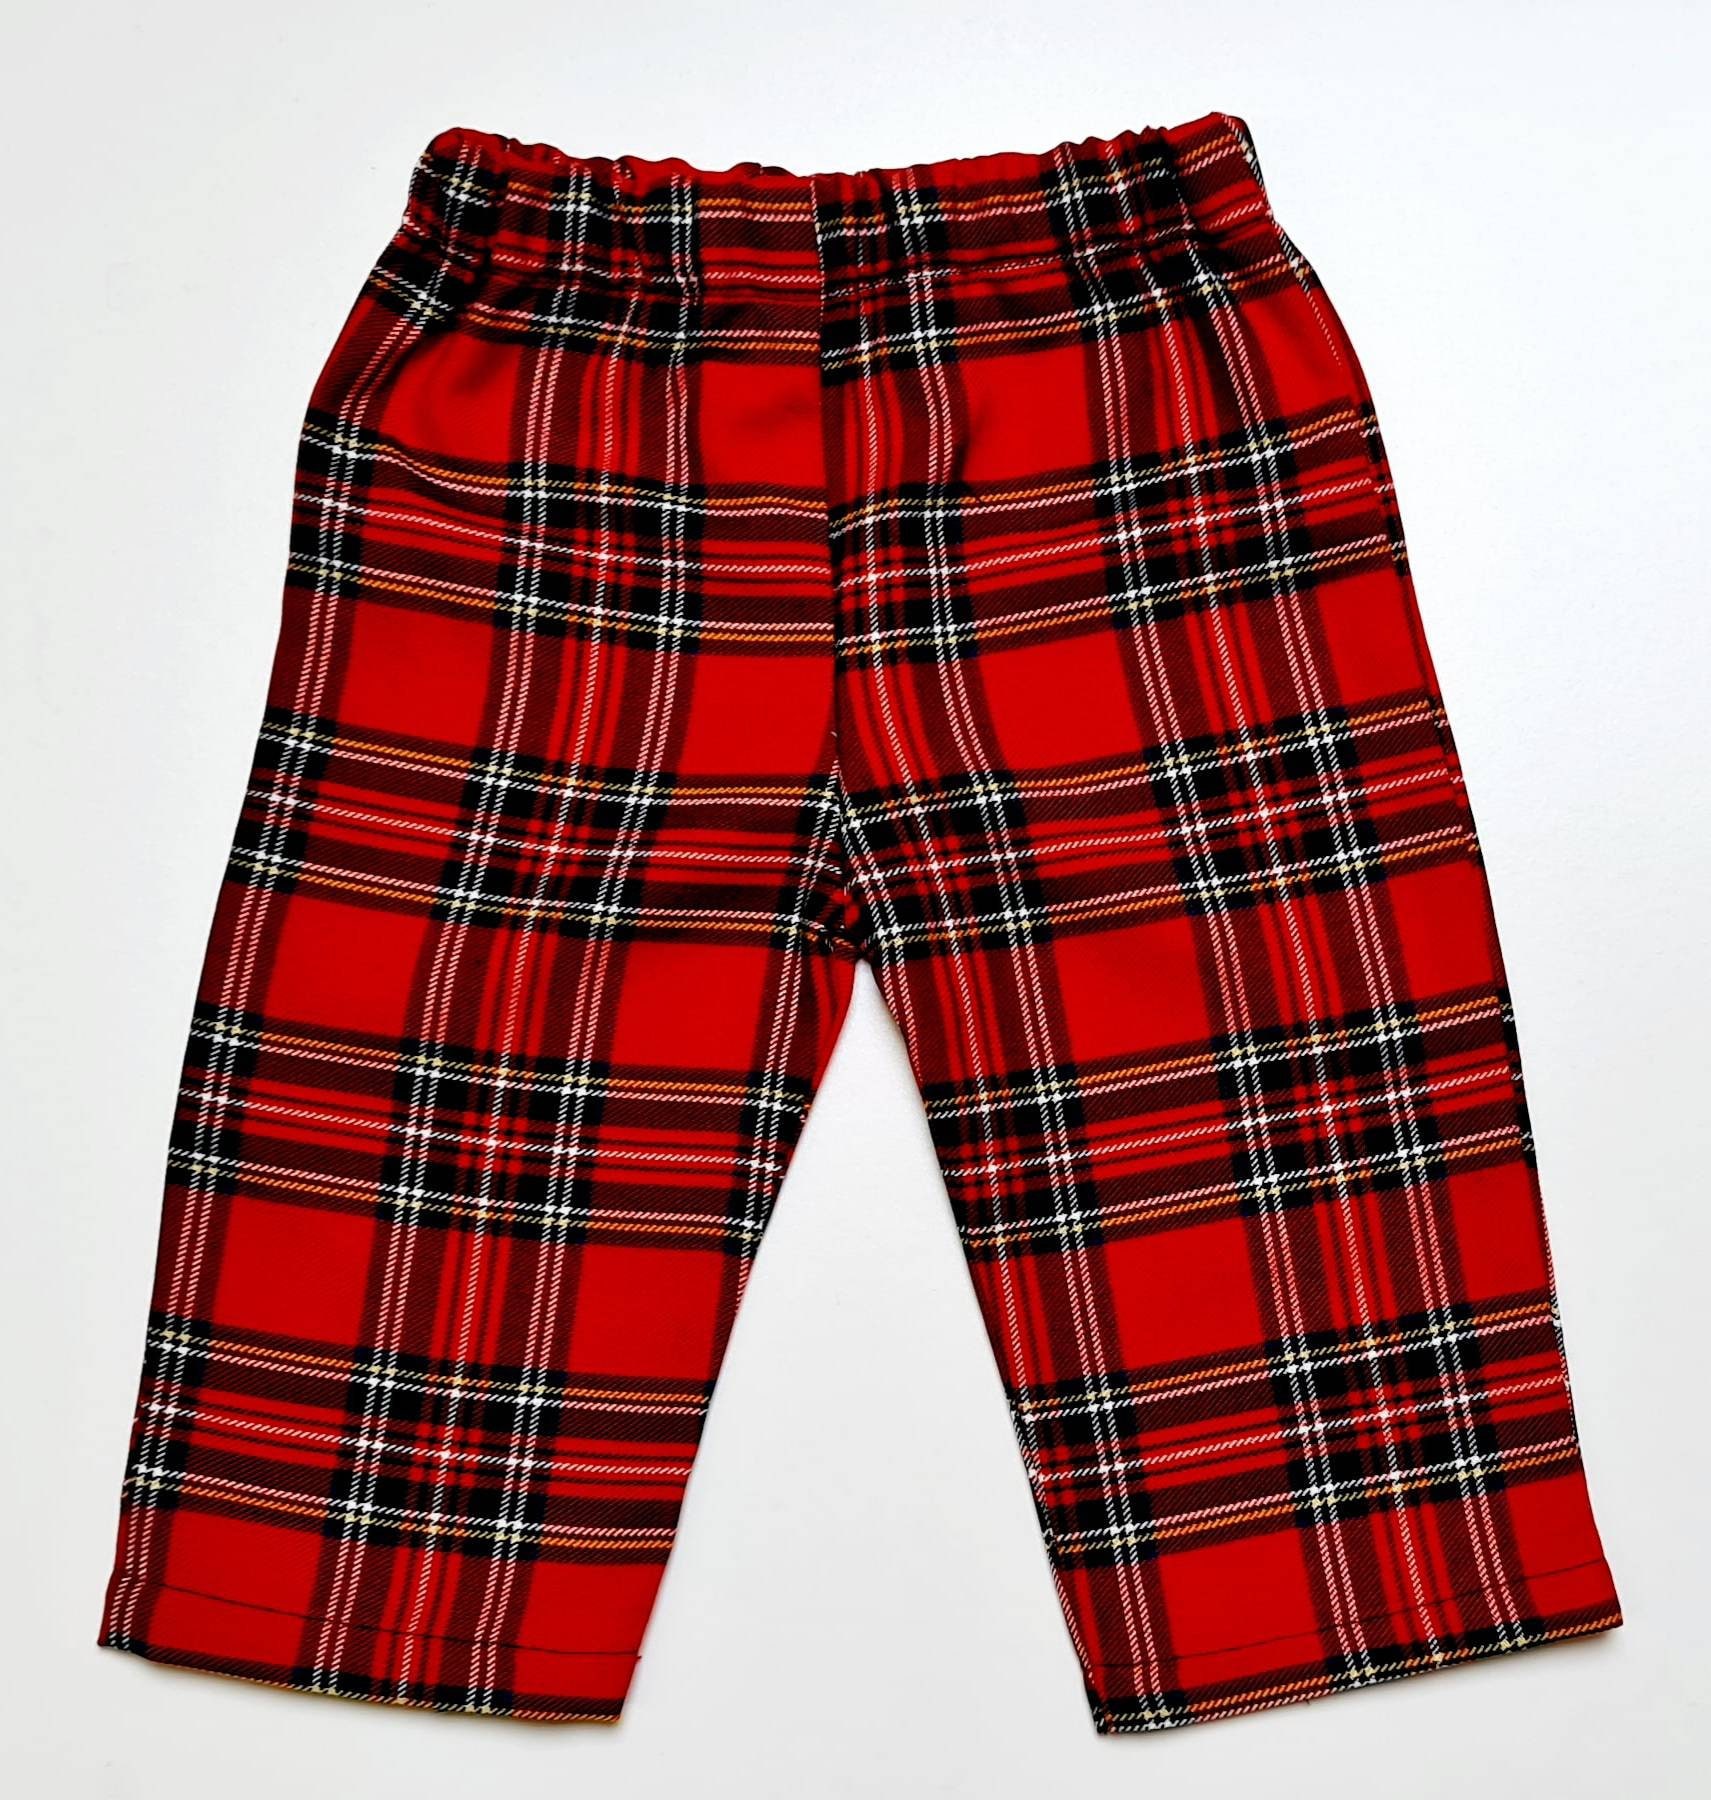 Tartan Pants Outfits  20 Ideas How to Wear Them